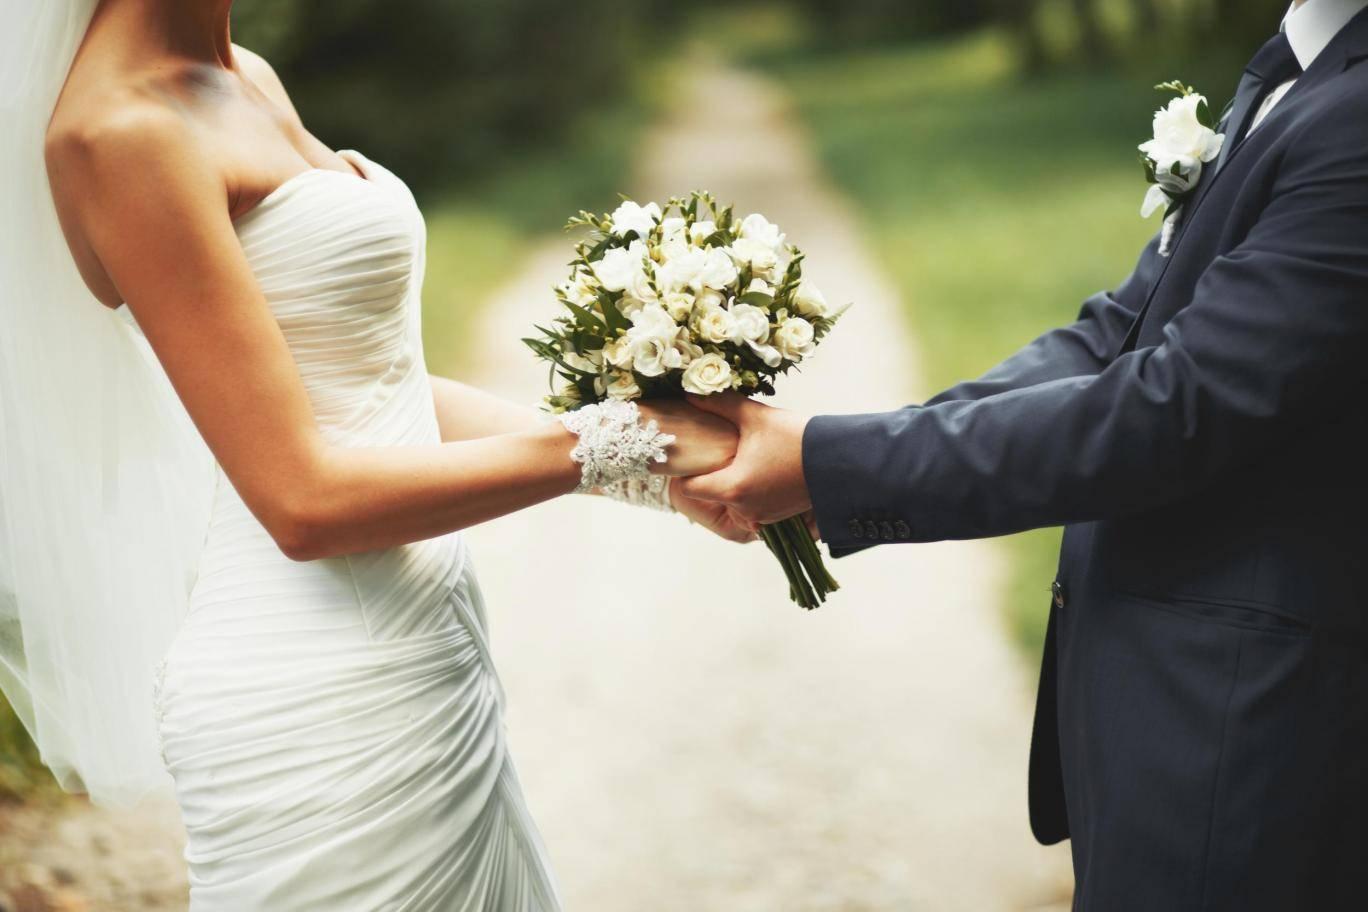 Marriages Between Men And Women Hit Lowest Rate On Record The Independent